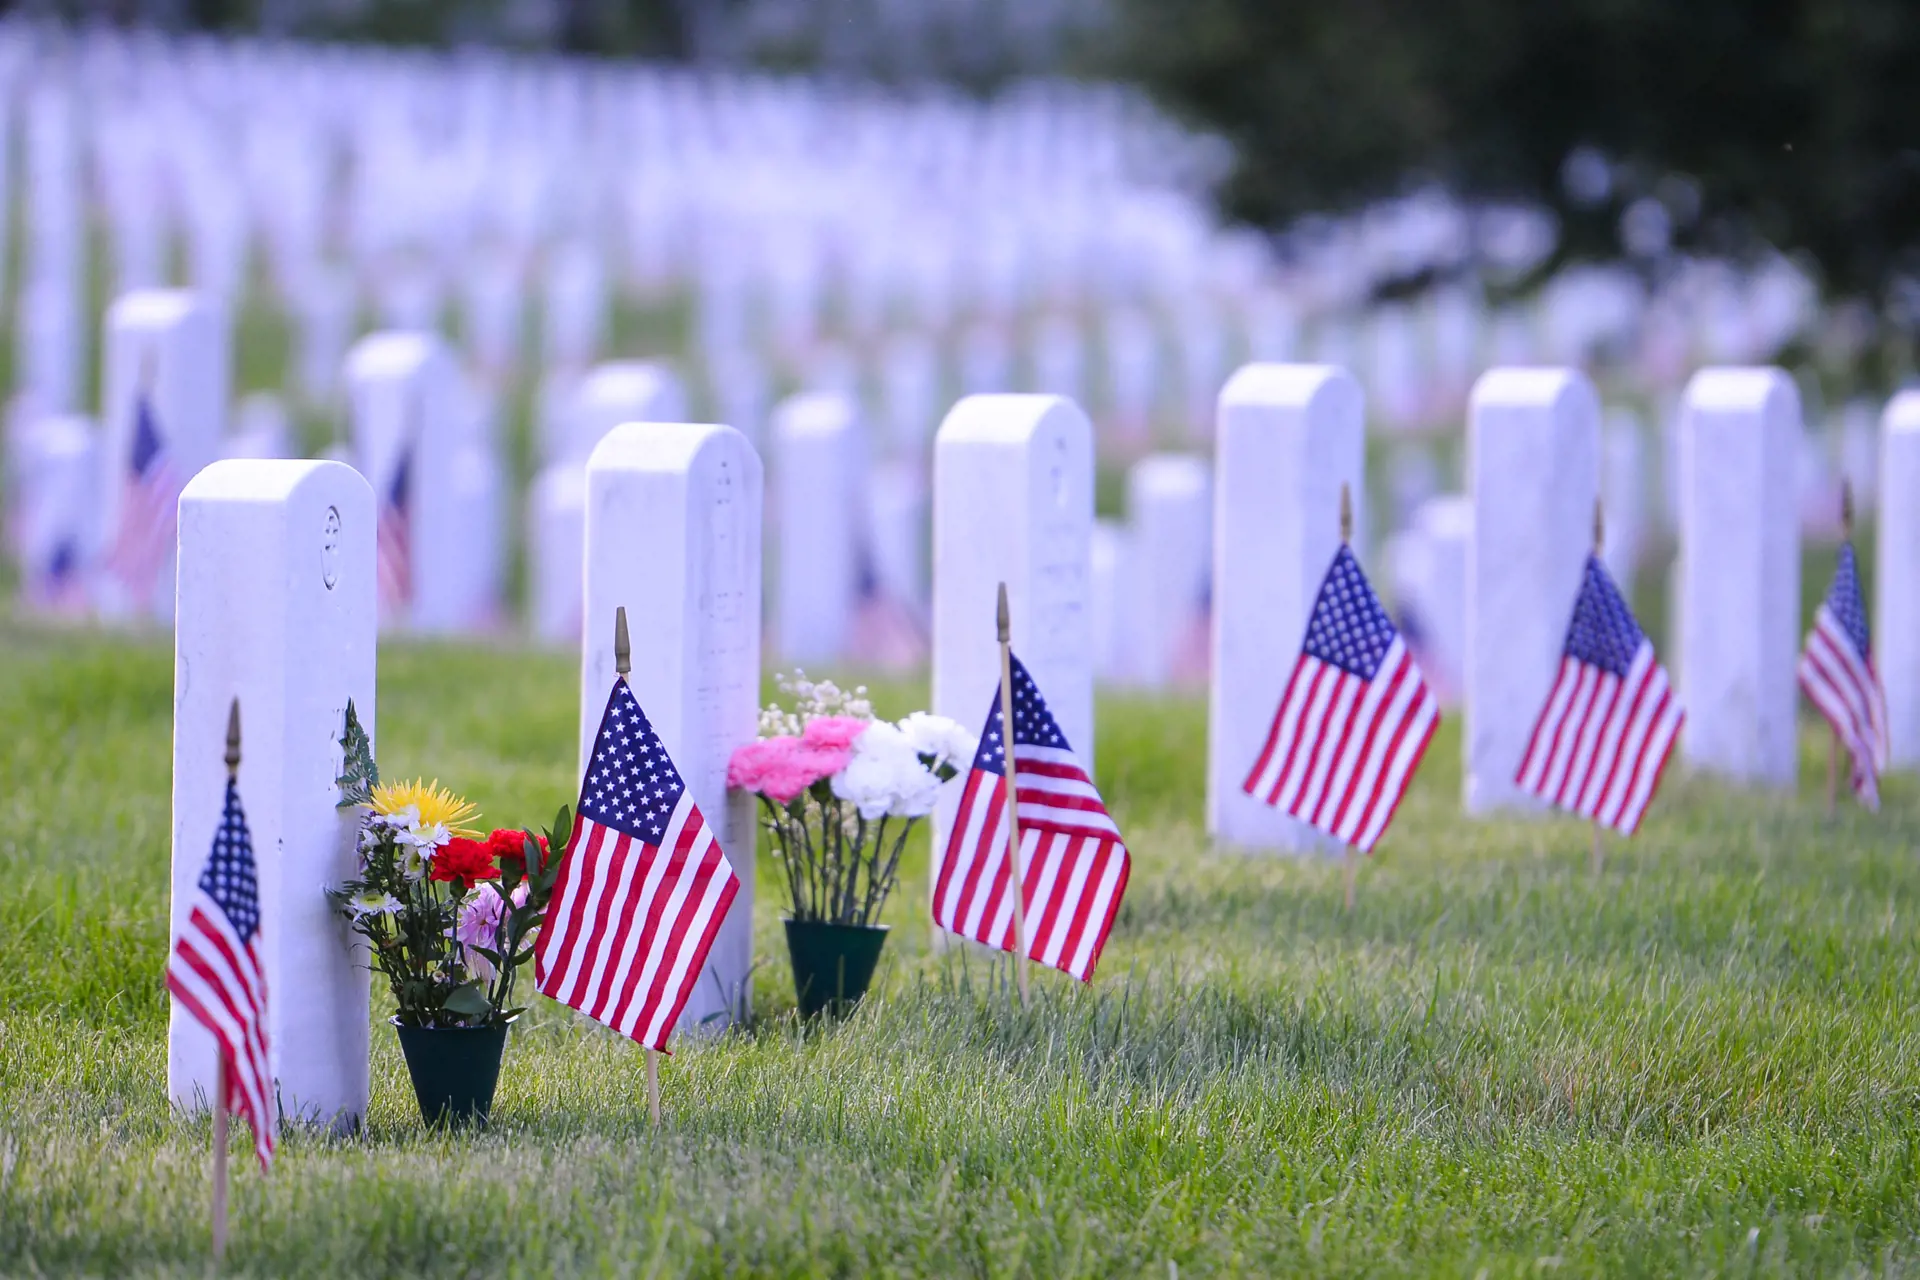 shutterstock_198074138 Arlington National Cemetery with a flag next to each headstone during Memorial day.jpg